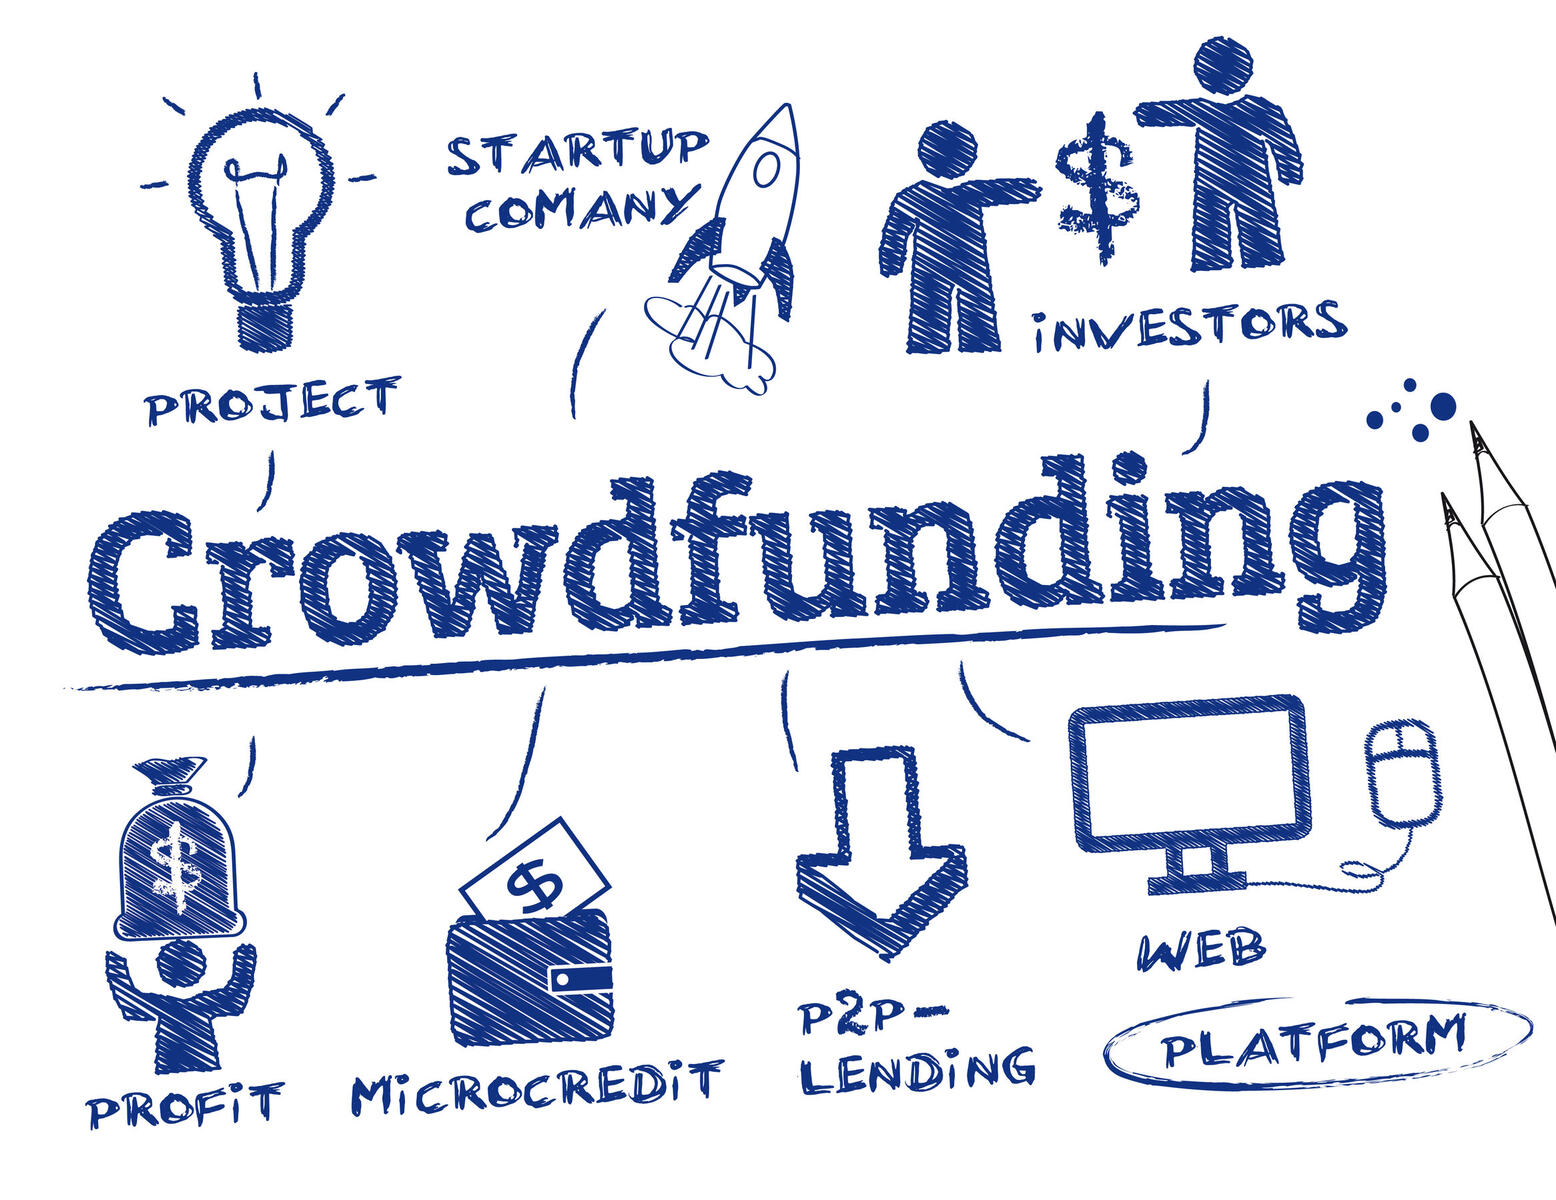 How Much Money Can Be Raised Through Crowdfunding?